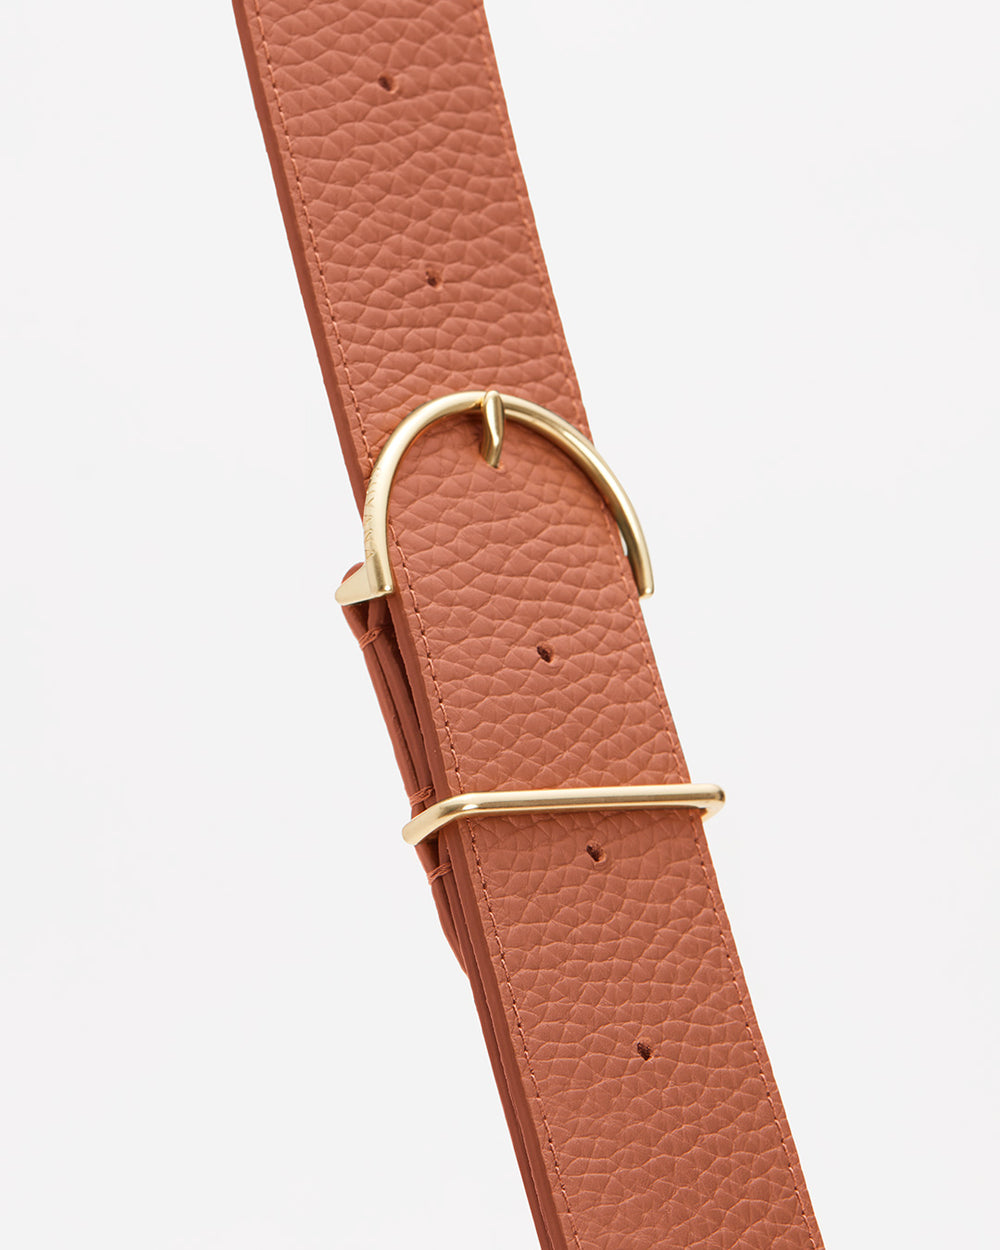 Leather strap with two metallic buckles, isolated on plain background.